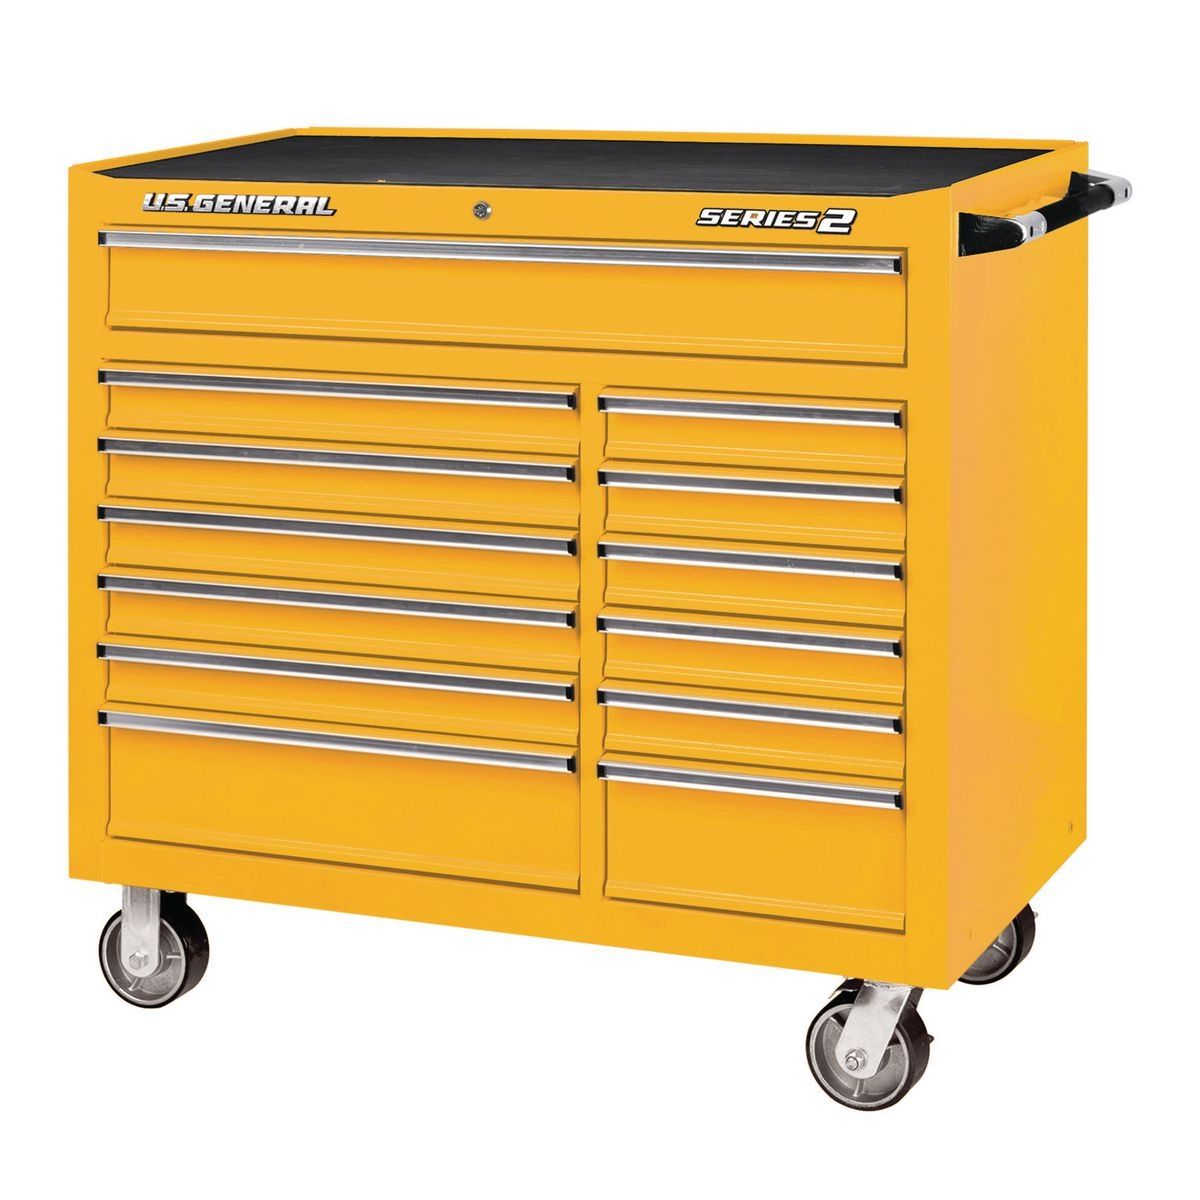 Select Harbor Freight Stores: U.S. General 44 x 22 Double Bank Roller  Cabinet